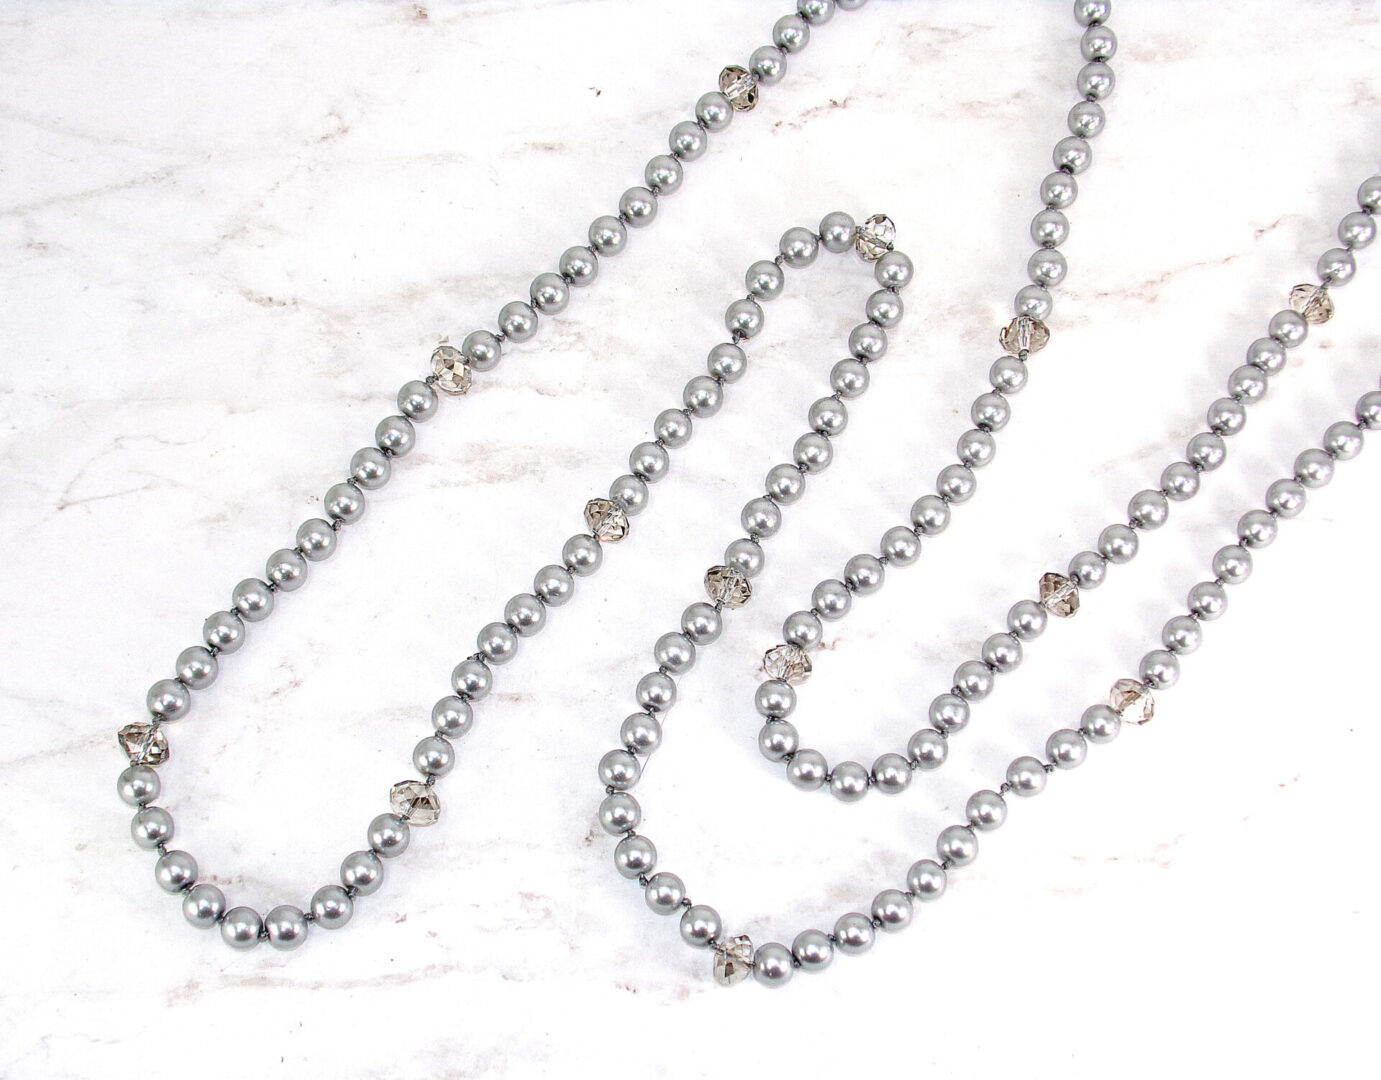 LONG GRAY PEARL & GLASS BEADED NECKLACE - Calisa Designs